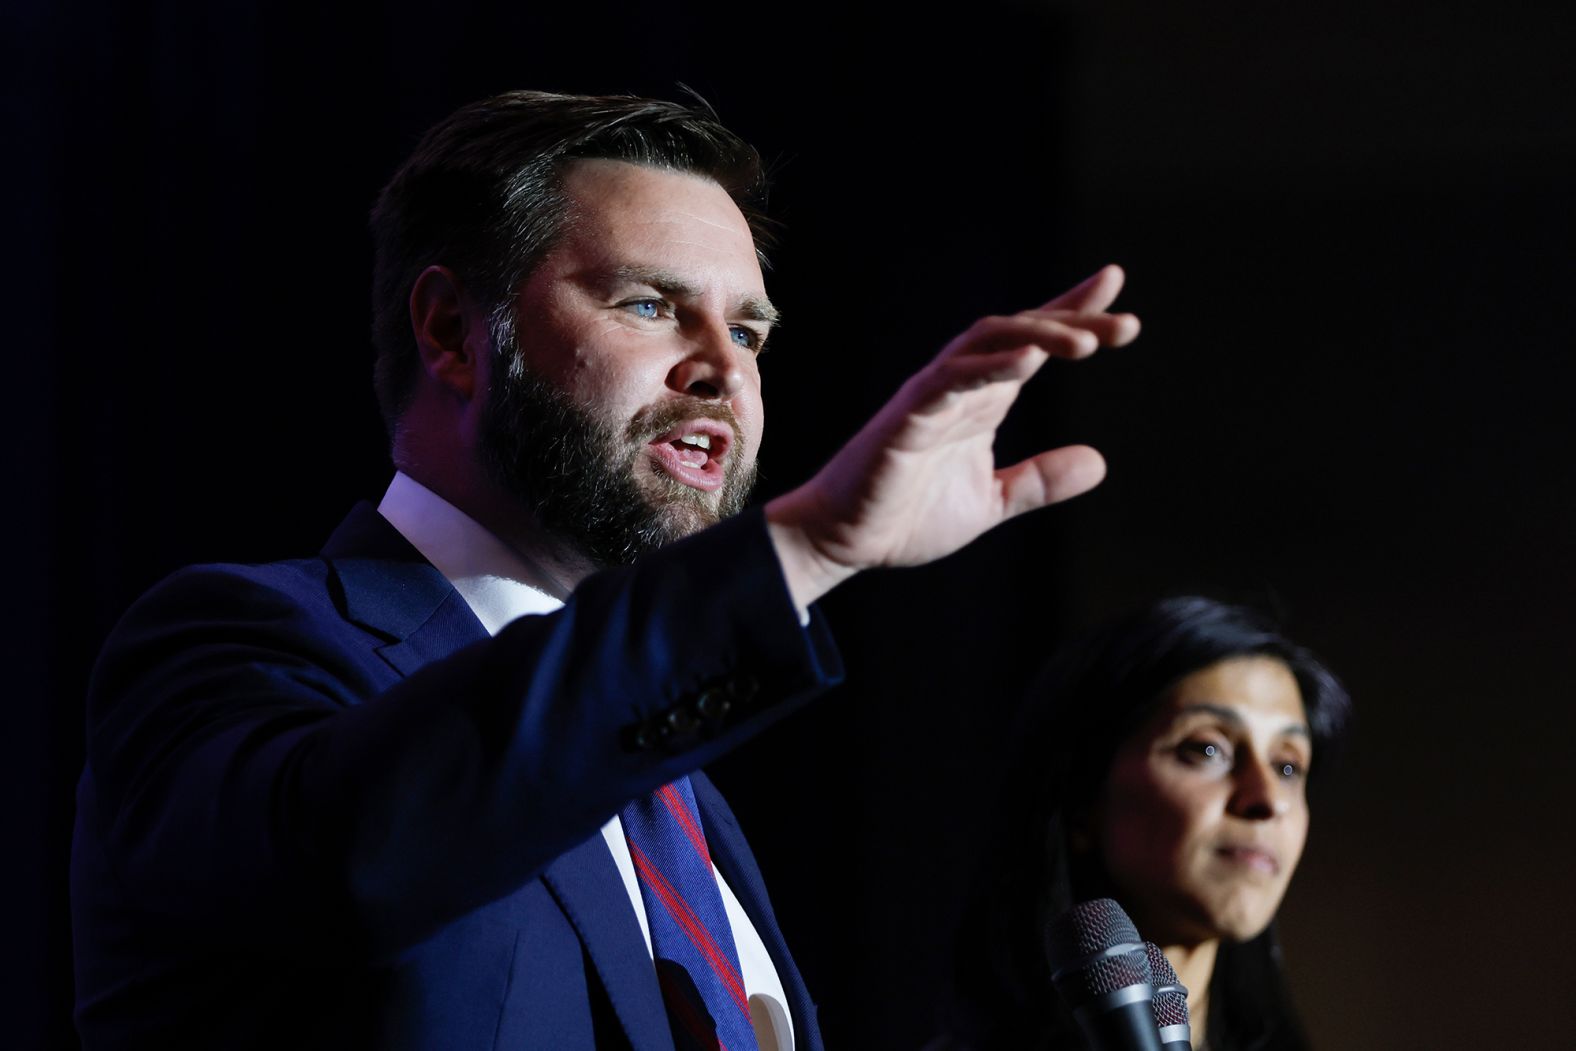 J.D. Vance, a Republican who <a href="index.php?page=&url=https%3A%2F%2Fwww.cnn.com%2Fpolitics%2Flive-news%2Fmidterm-election-results-livestream-voting-11-08-2022%2Fh_9c806a5f350d7fe44fcf510967a33c55" target="_blank">CNN projected would win the open Senate seat in Ohio,</a> speaks at an election night party in Columbus. Vance's win over Tim Ryan is a boon for Republicans and a victory for former President Donald Trump, whose endorsement in the Republican primary helped Vance emerge from a contentious intraparty fight. 